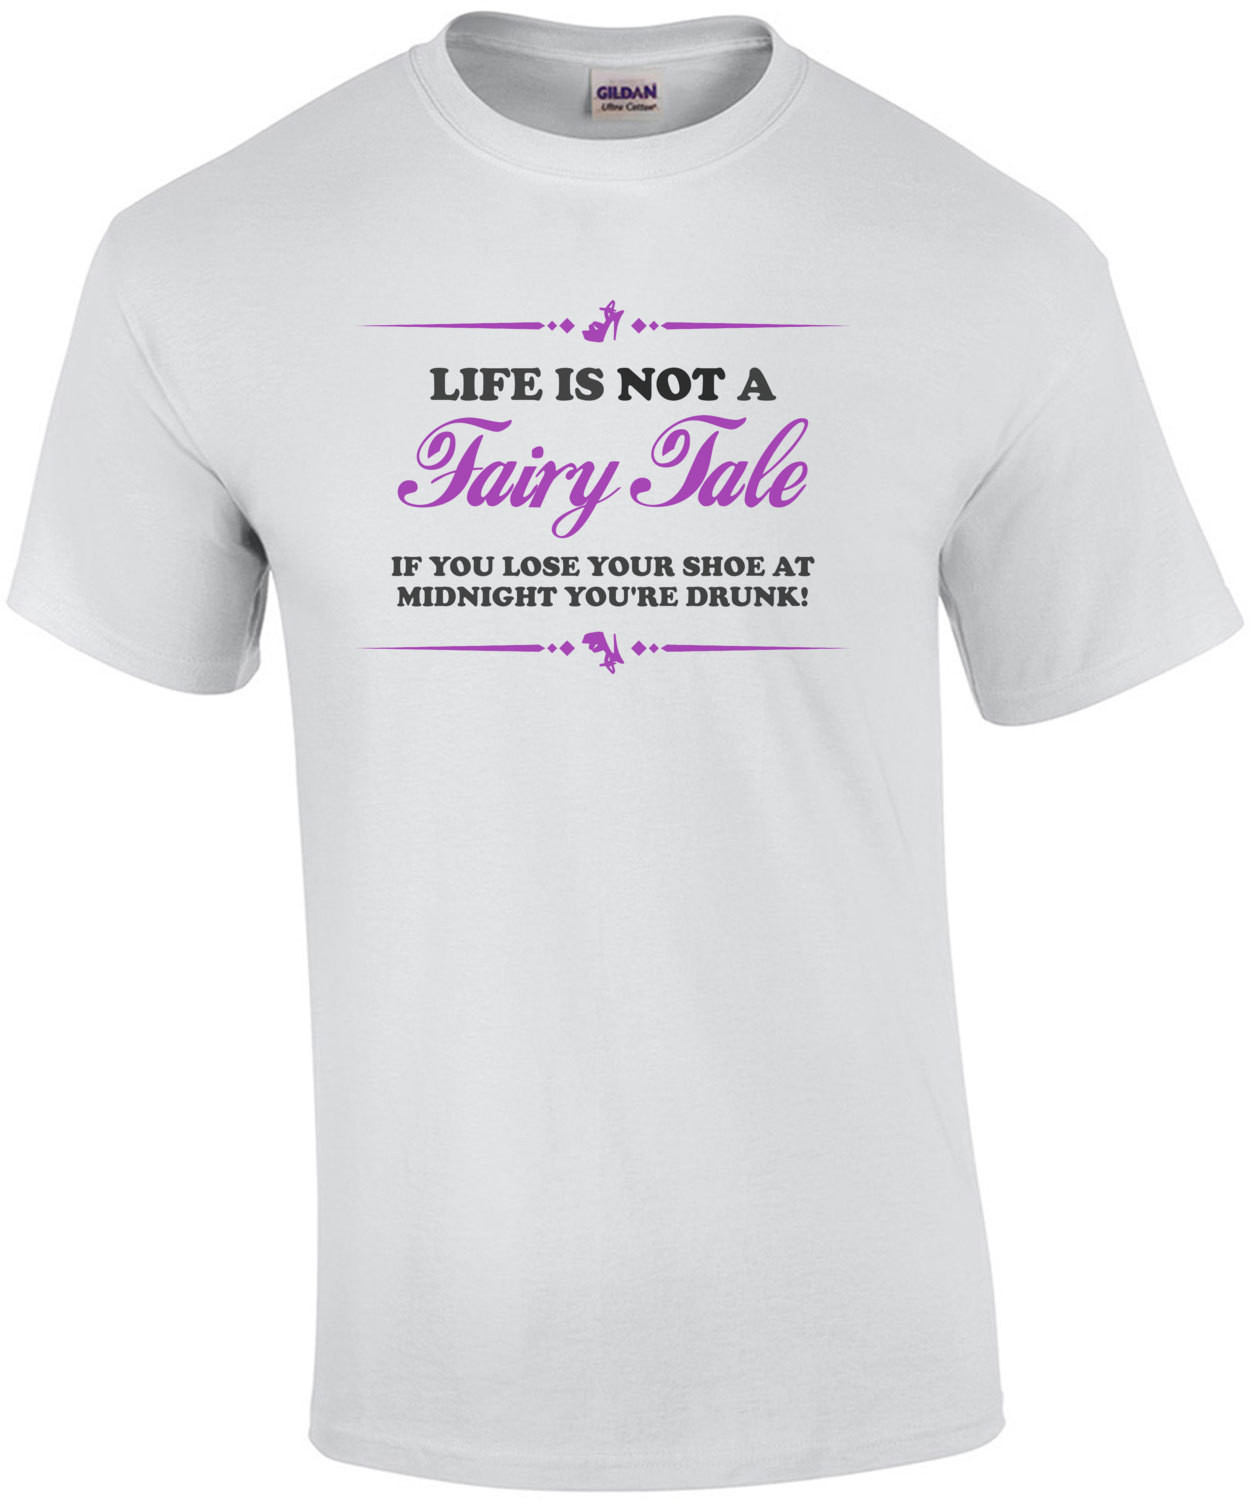 Life is Not a Fairy Tale Shirt